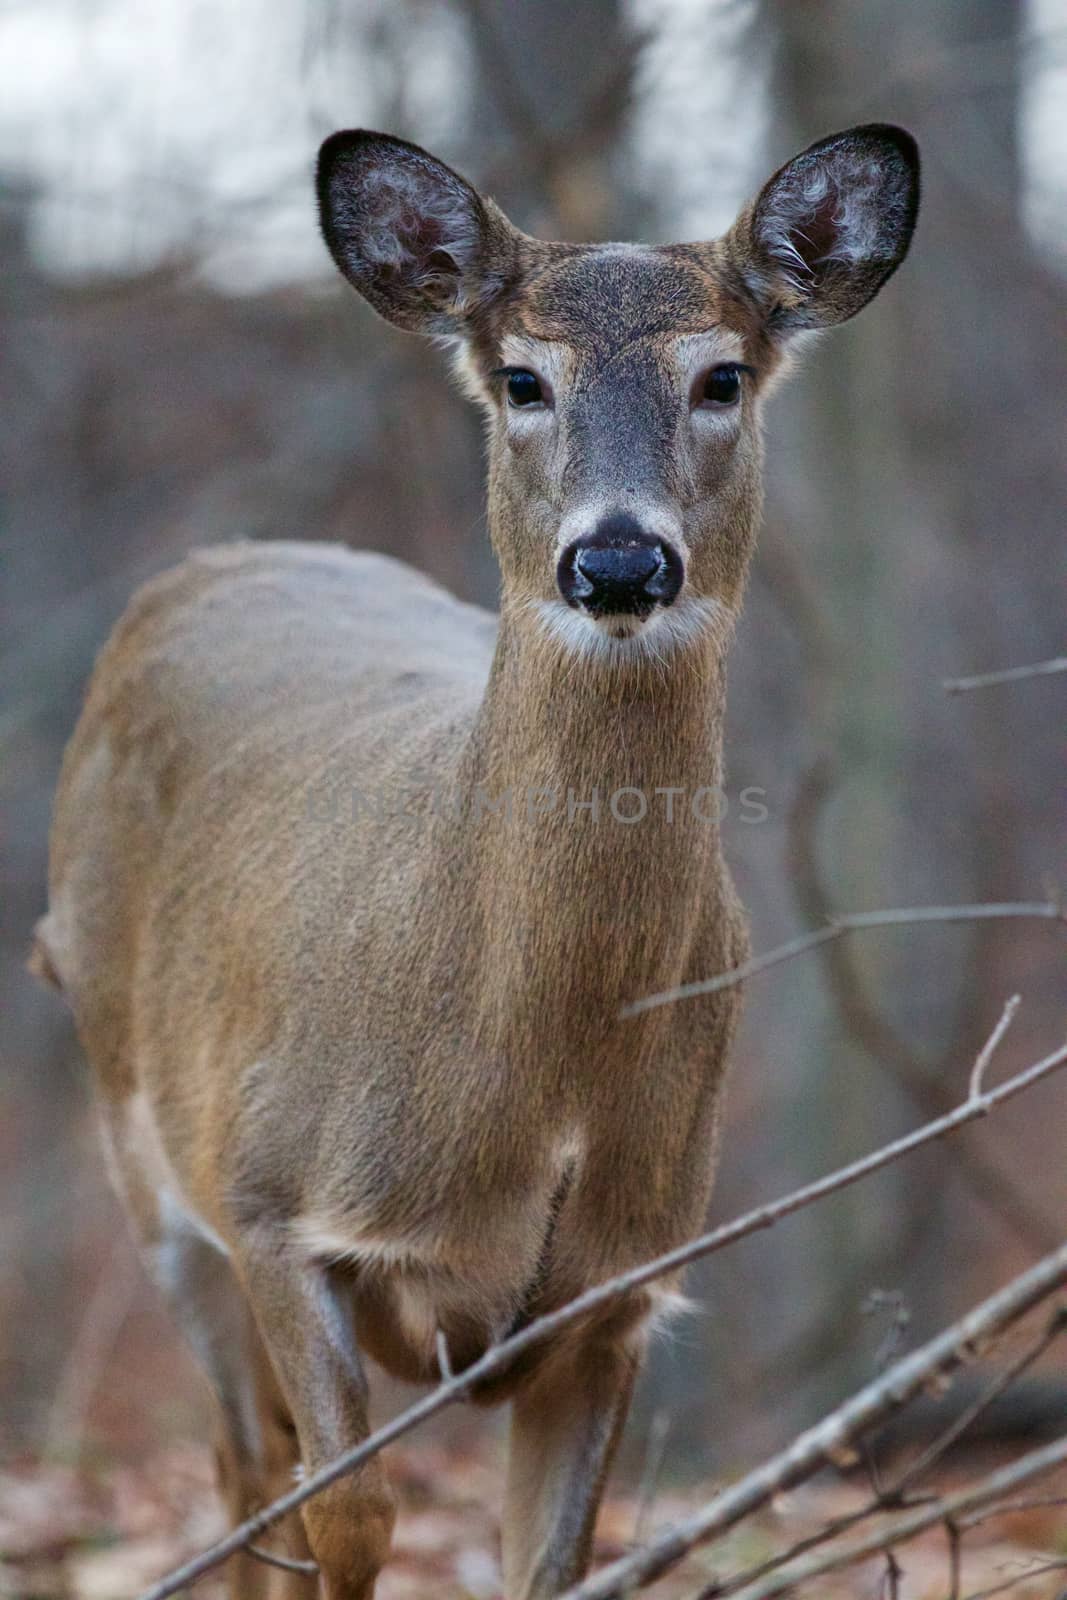 Nice image with a wild deer in the forest